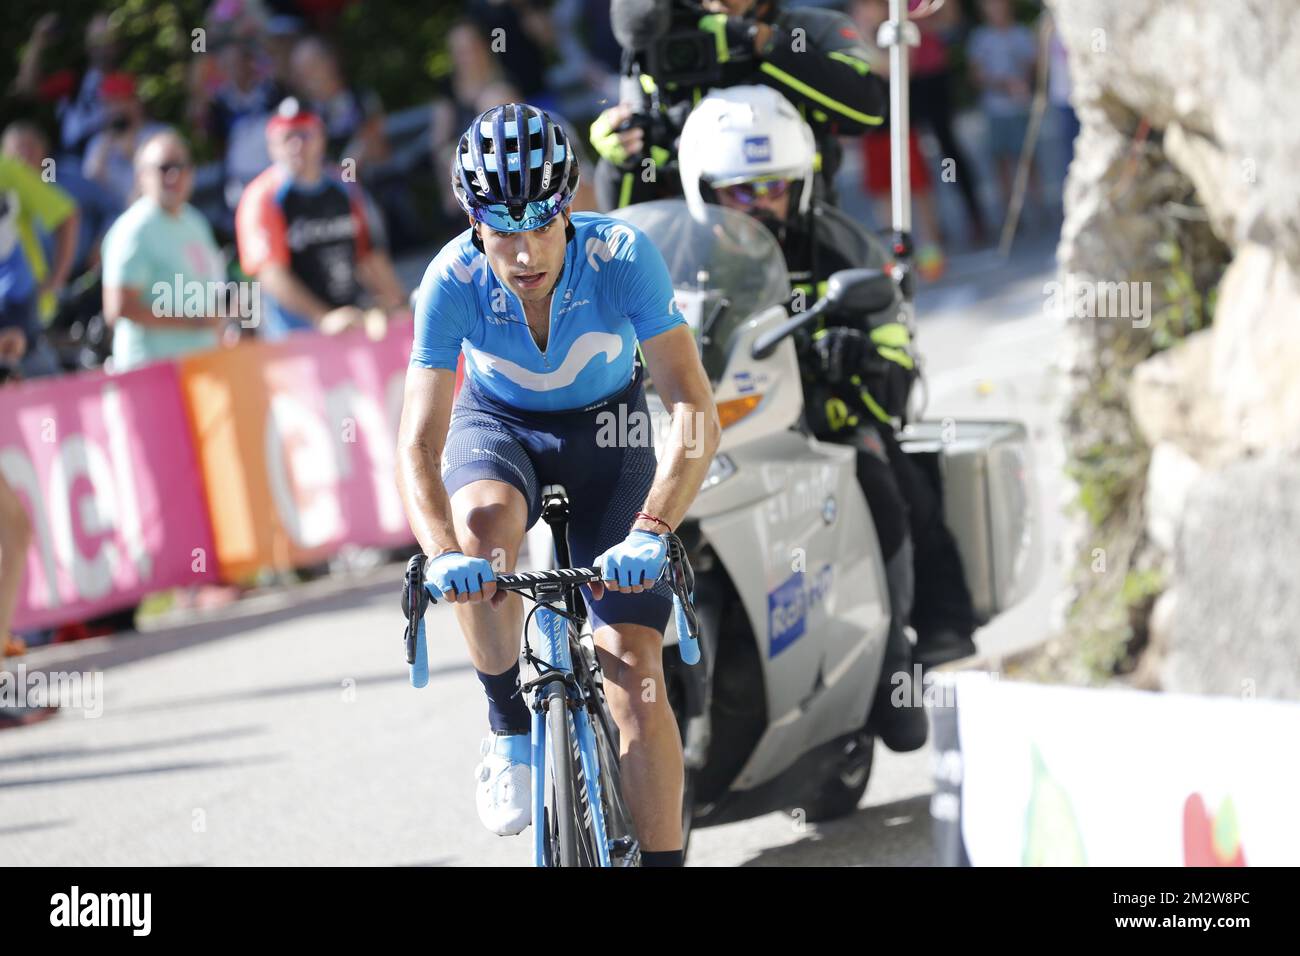 Spanish Mikel Landa of Movistar Team pictured in action during the twentieth stage of the 101st edition of the Giro D'Italia cycling race, 194km from Feltre to Croce d'Aune-Monte Avena, Italy, Saturday 01 June 2019. BELGA PHOTO YUZURU SUNADA FRANCE OUT  Stock Photo